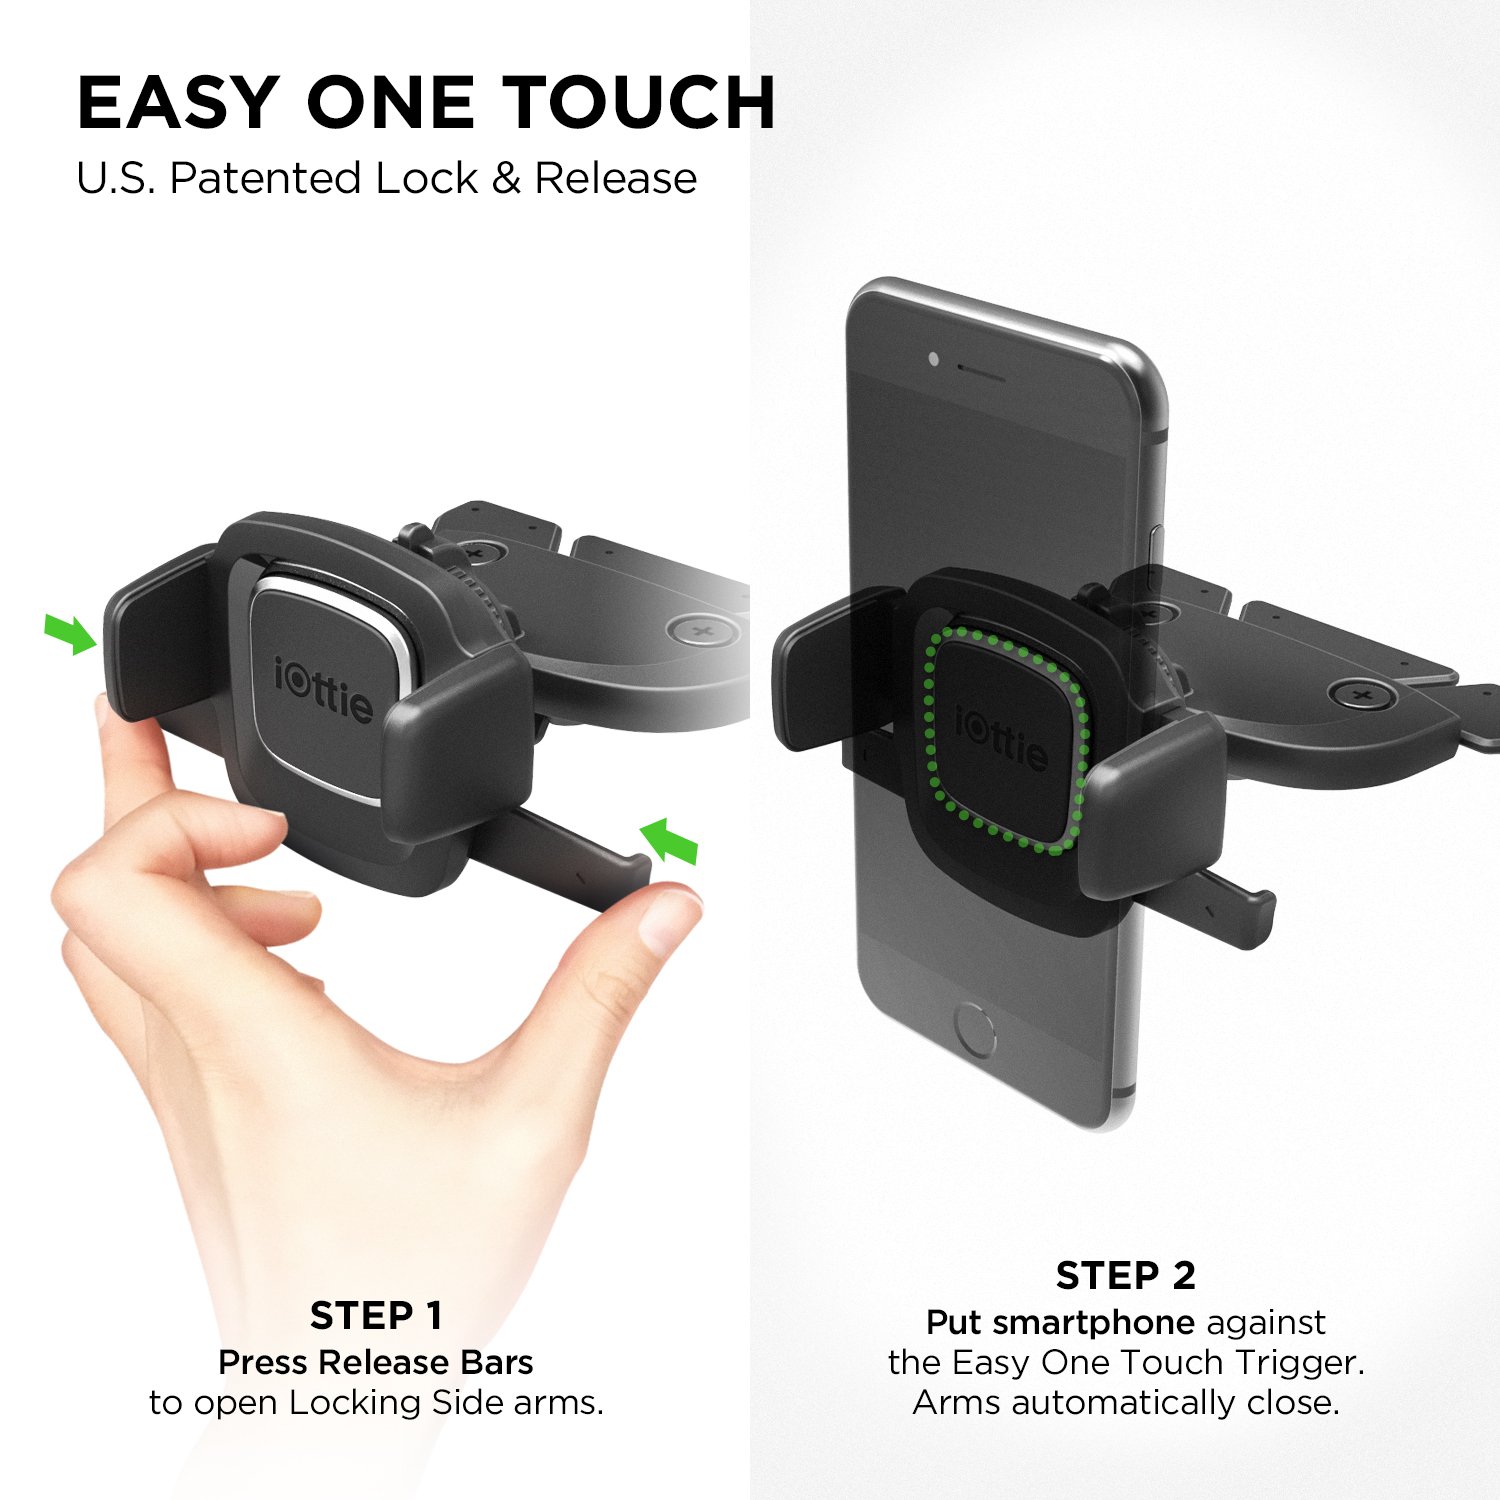 iOttie Easy One Touch 4 CD Slot Universal Car Mount Phone Holder, For IPhone, Samsung, Moto, Huawei, Nokia, LG, Smartphones,Black